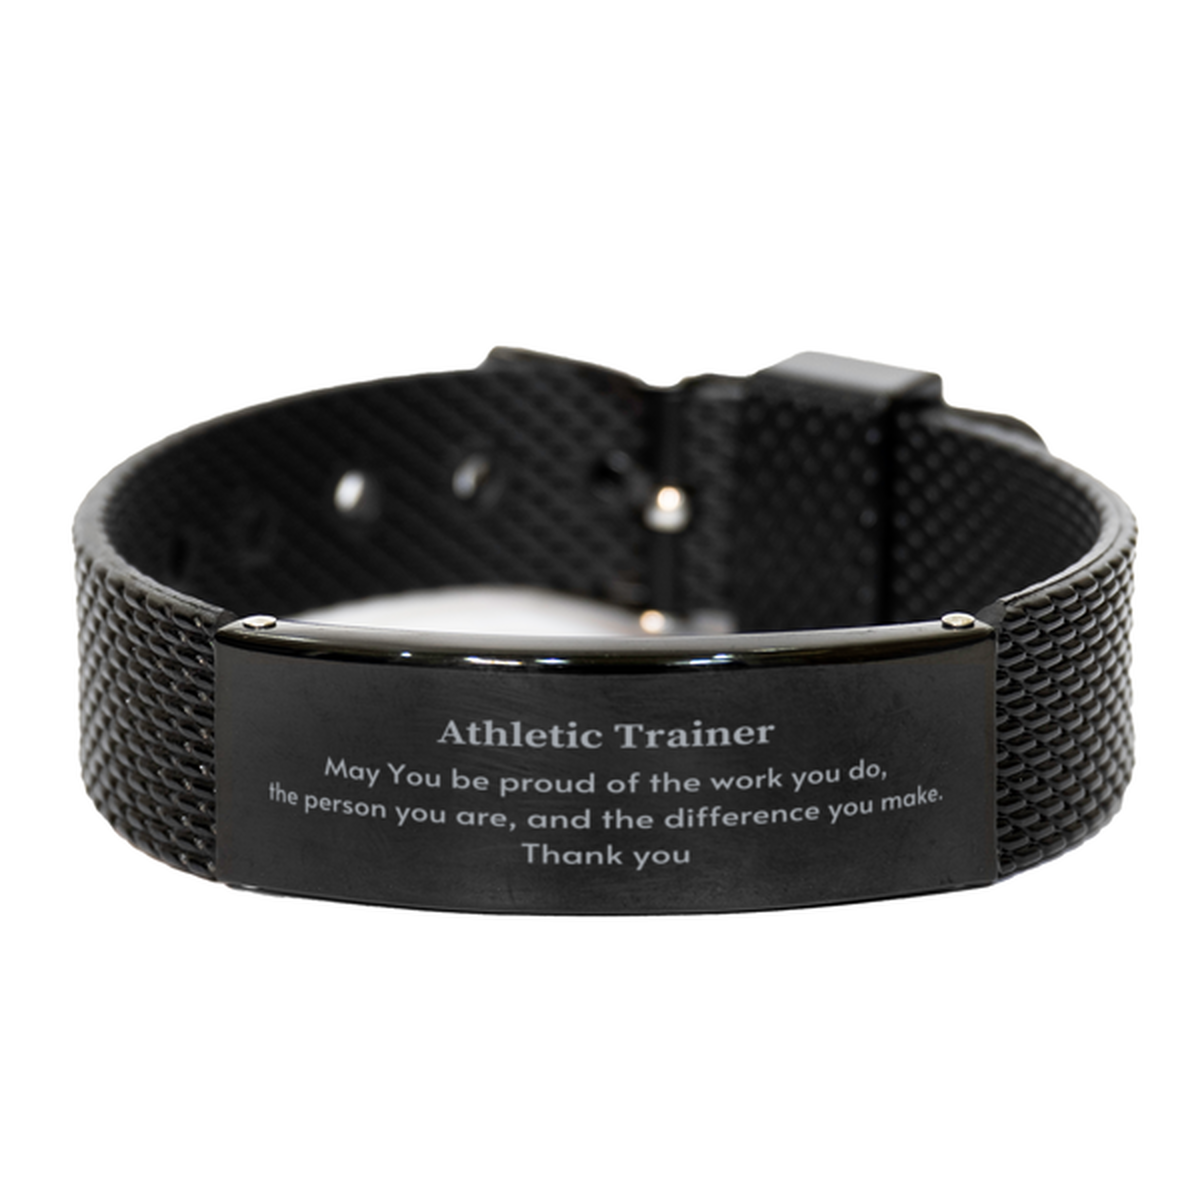 Heartwarming Black Shark Mesh Bracelet Retirement Coworkers Gifts for Athletic Trainer, Athletic Trainer May You be proud of the work you do, the person you are Gifts for Boss Men Women Friends